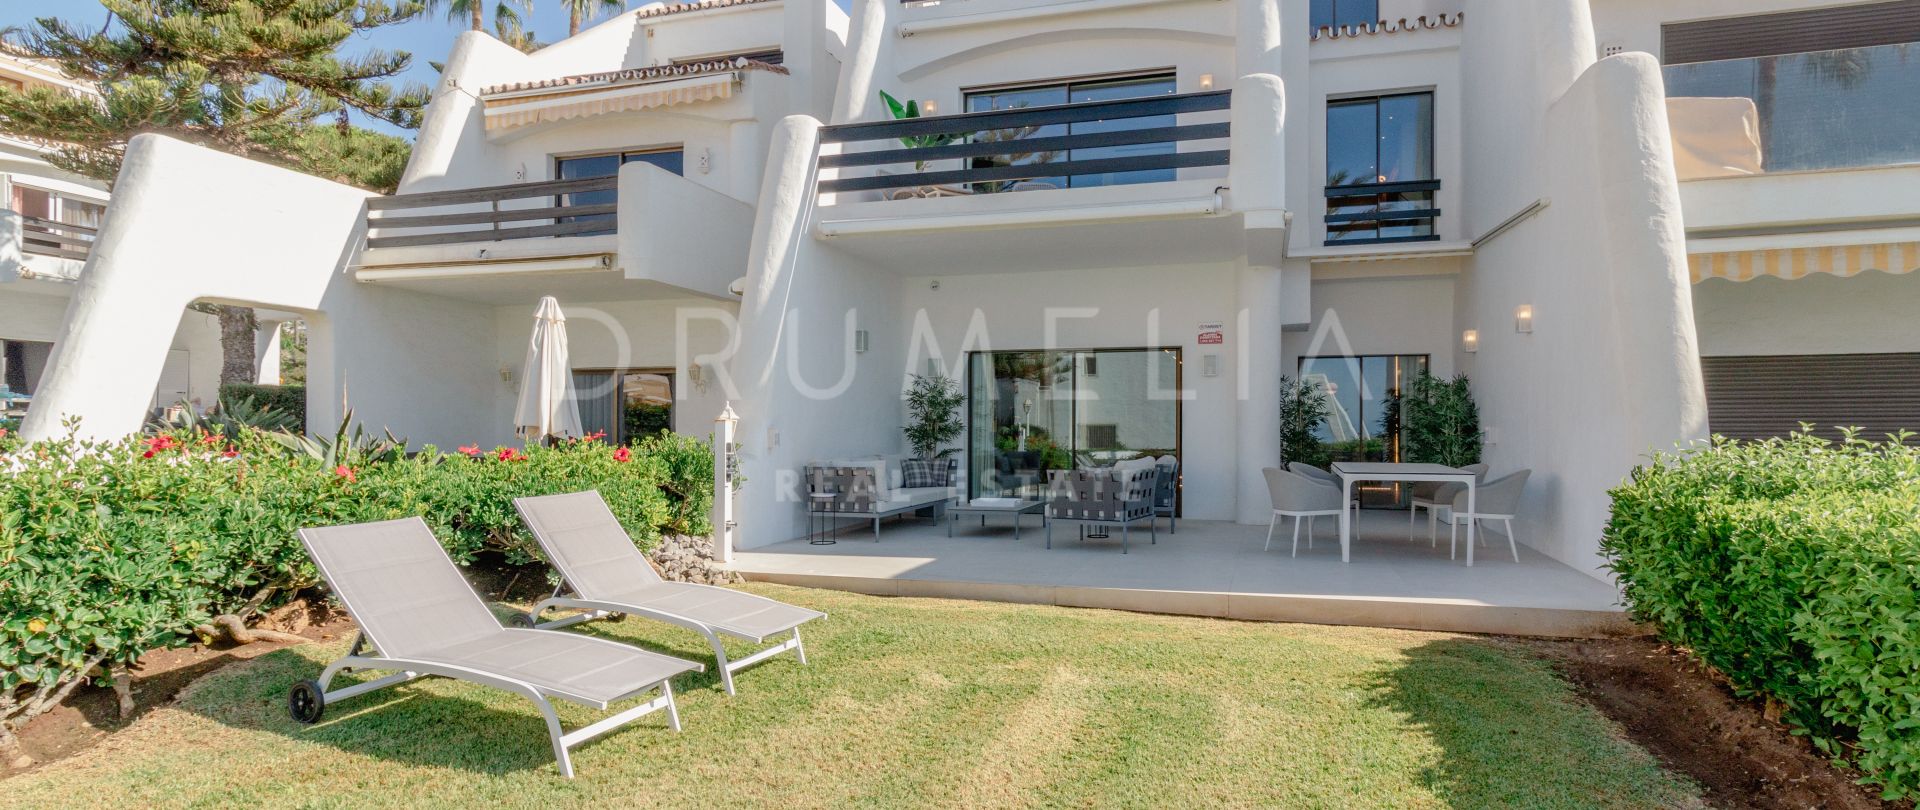 Fully renovated townhouse in beachfront resort Coral Beach on Marbella’s Golden Mile for sale